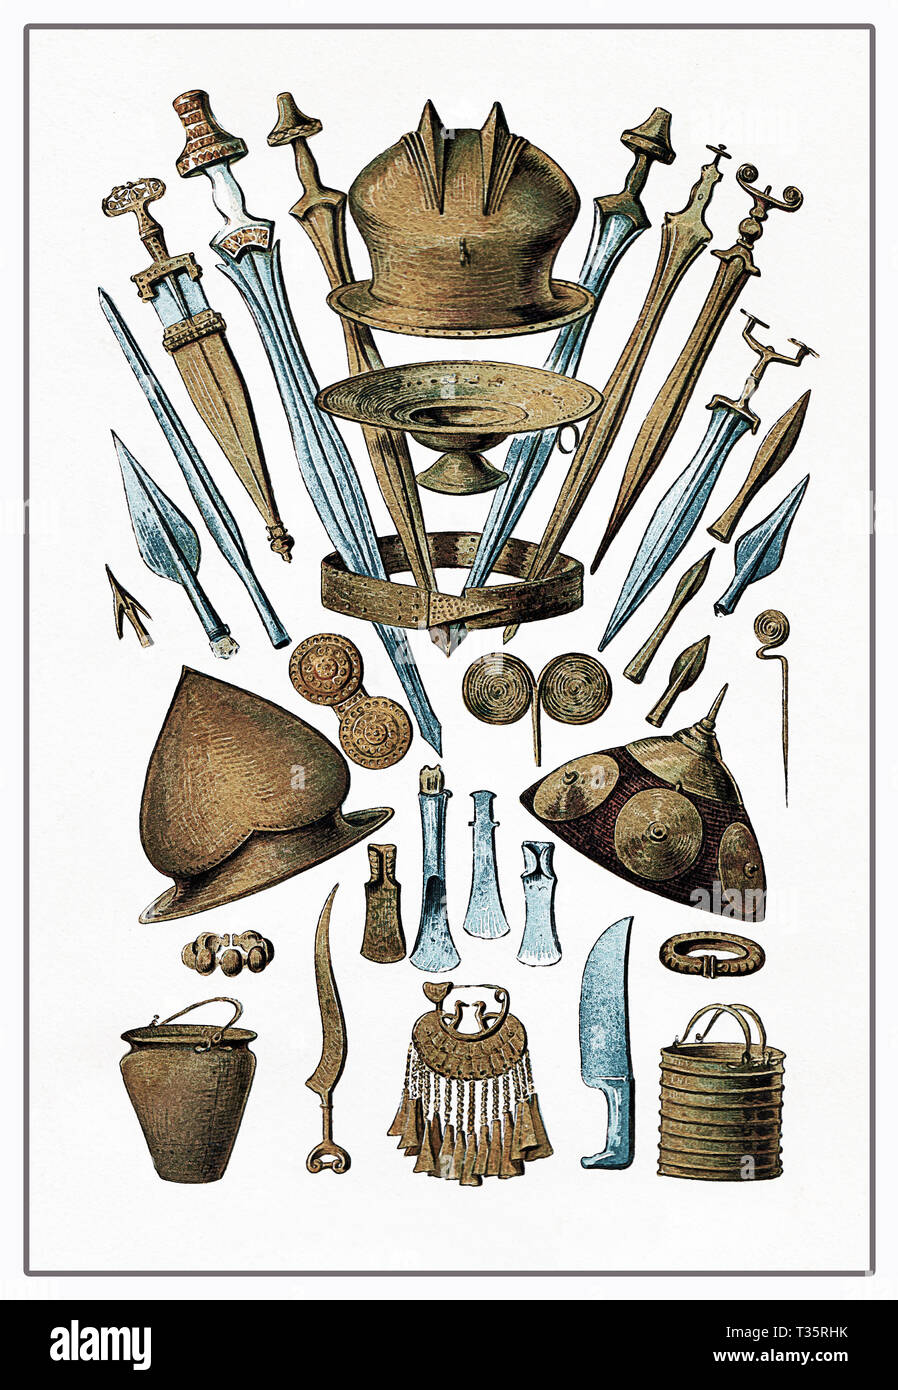 https://c8.alamy.com/comp/T35RHK/tools-weapon-and-ornaments-of-the-european-bronze-age-from-the-archeological-site-of-hallstatt-in-austria-ca-1100-450-bc-T35RHK.jpg